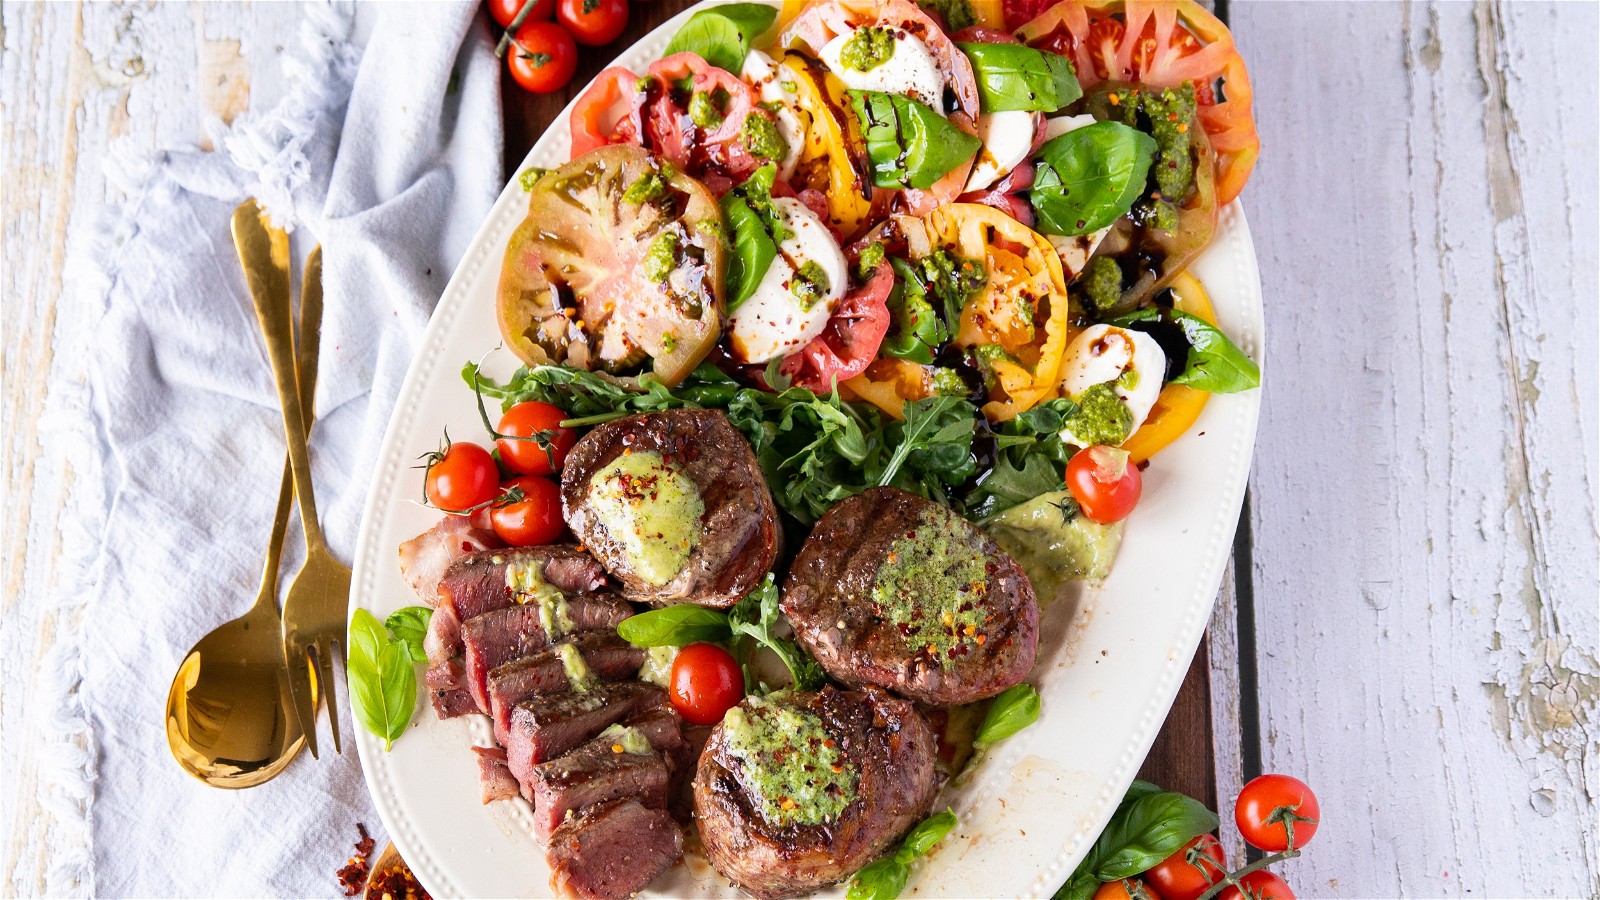 Image of Grilled Bacon Wrapped Tenderloin Steak With Caprese Salad